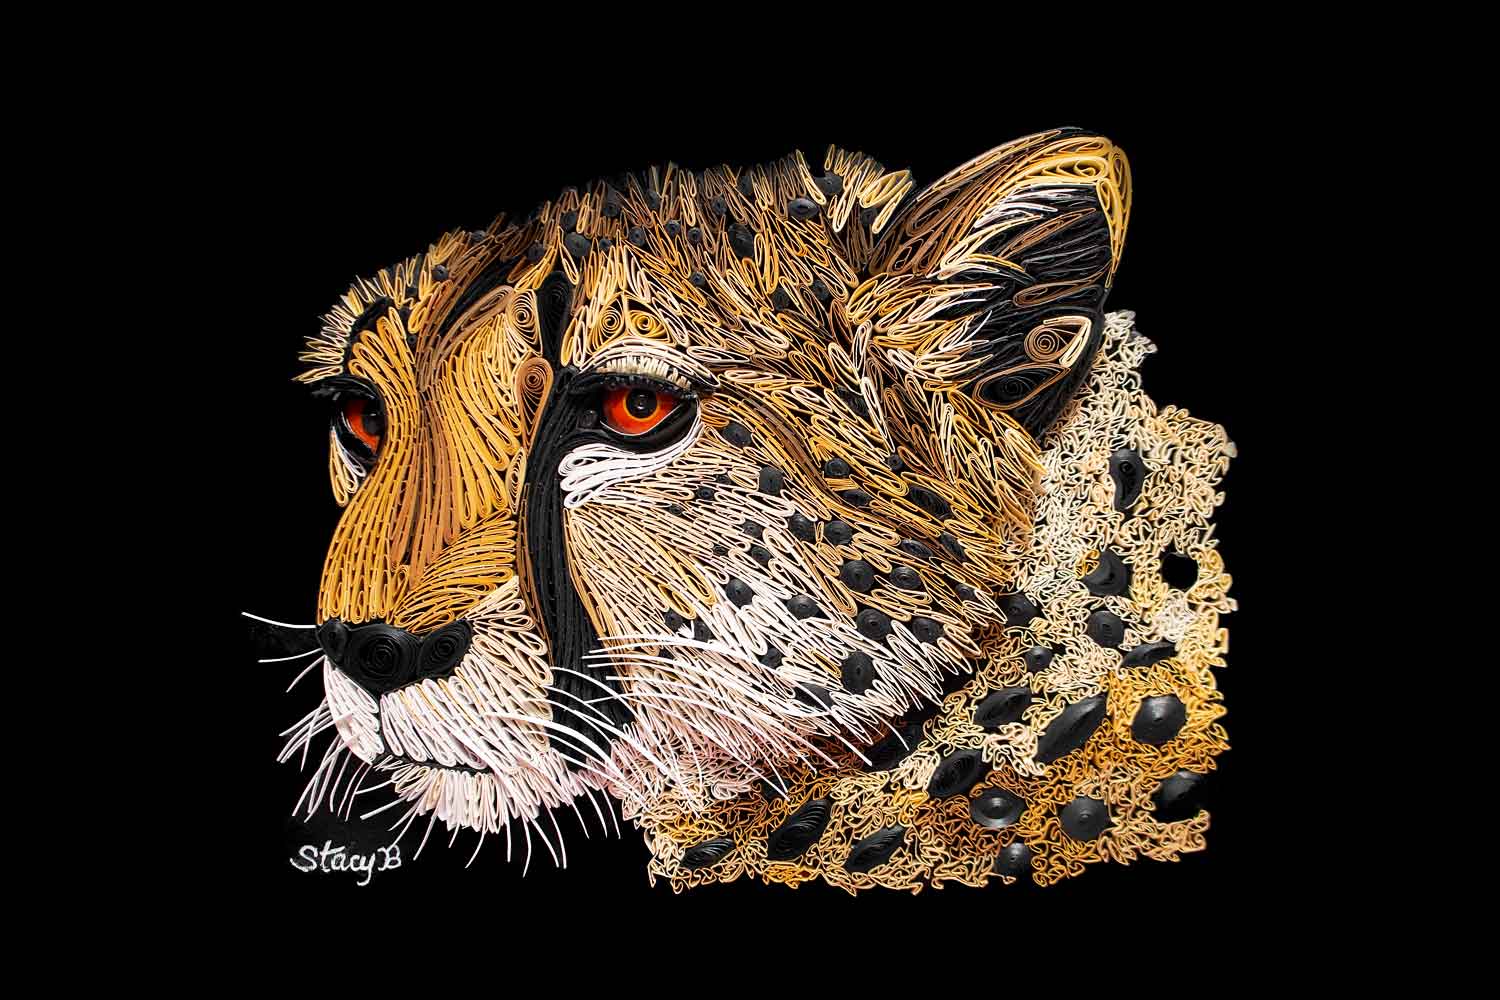 The Scovill Zoo Quilled Cheetah